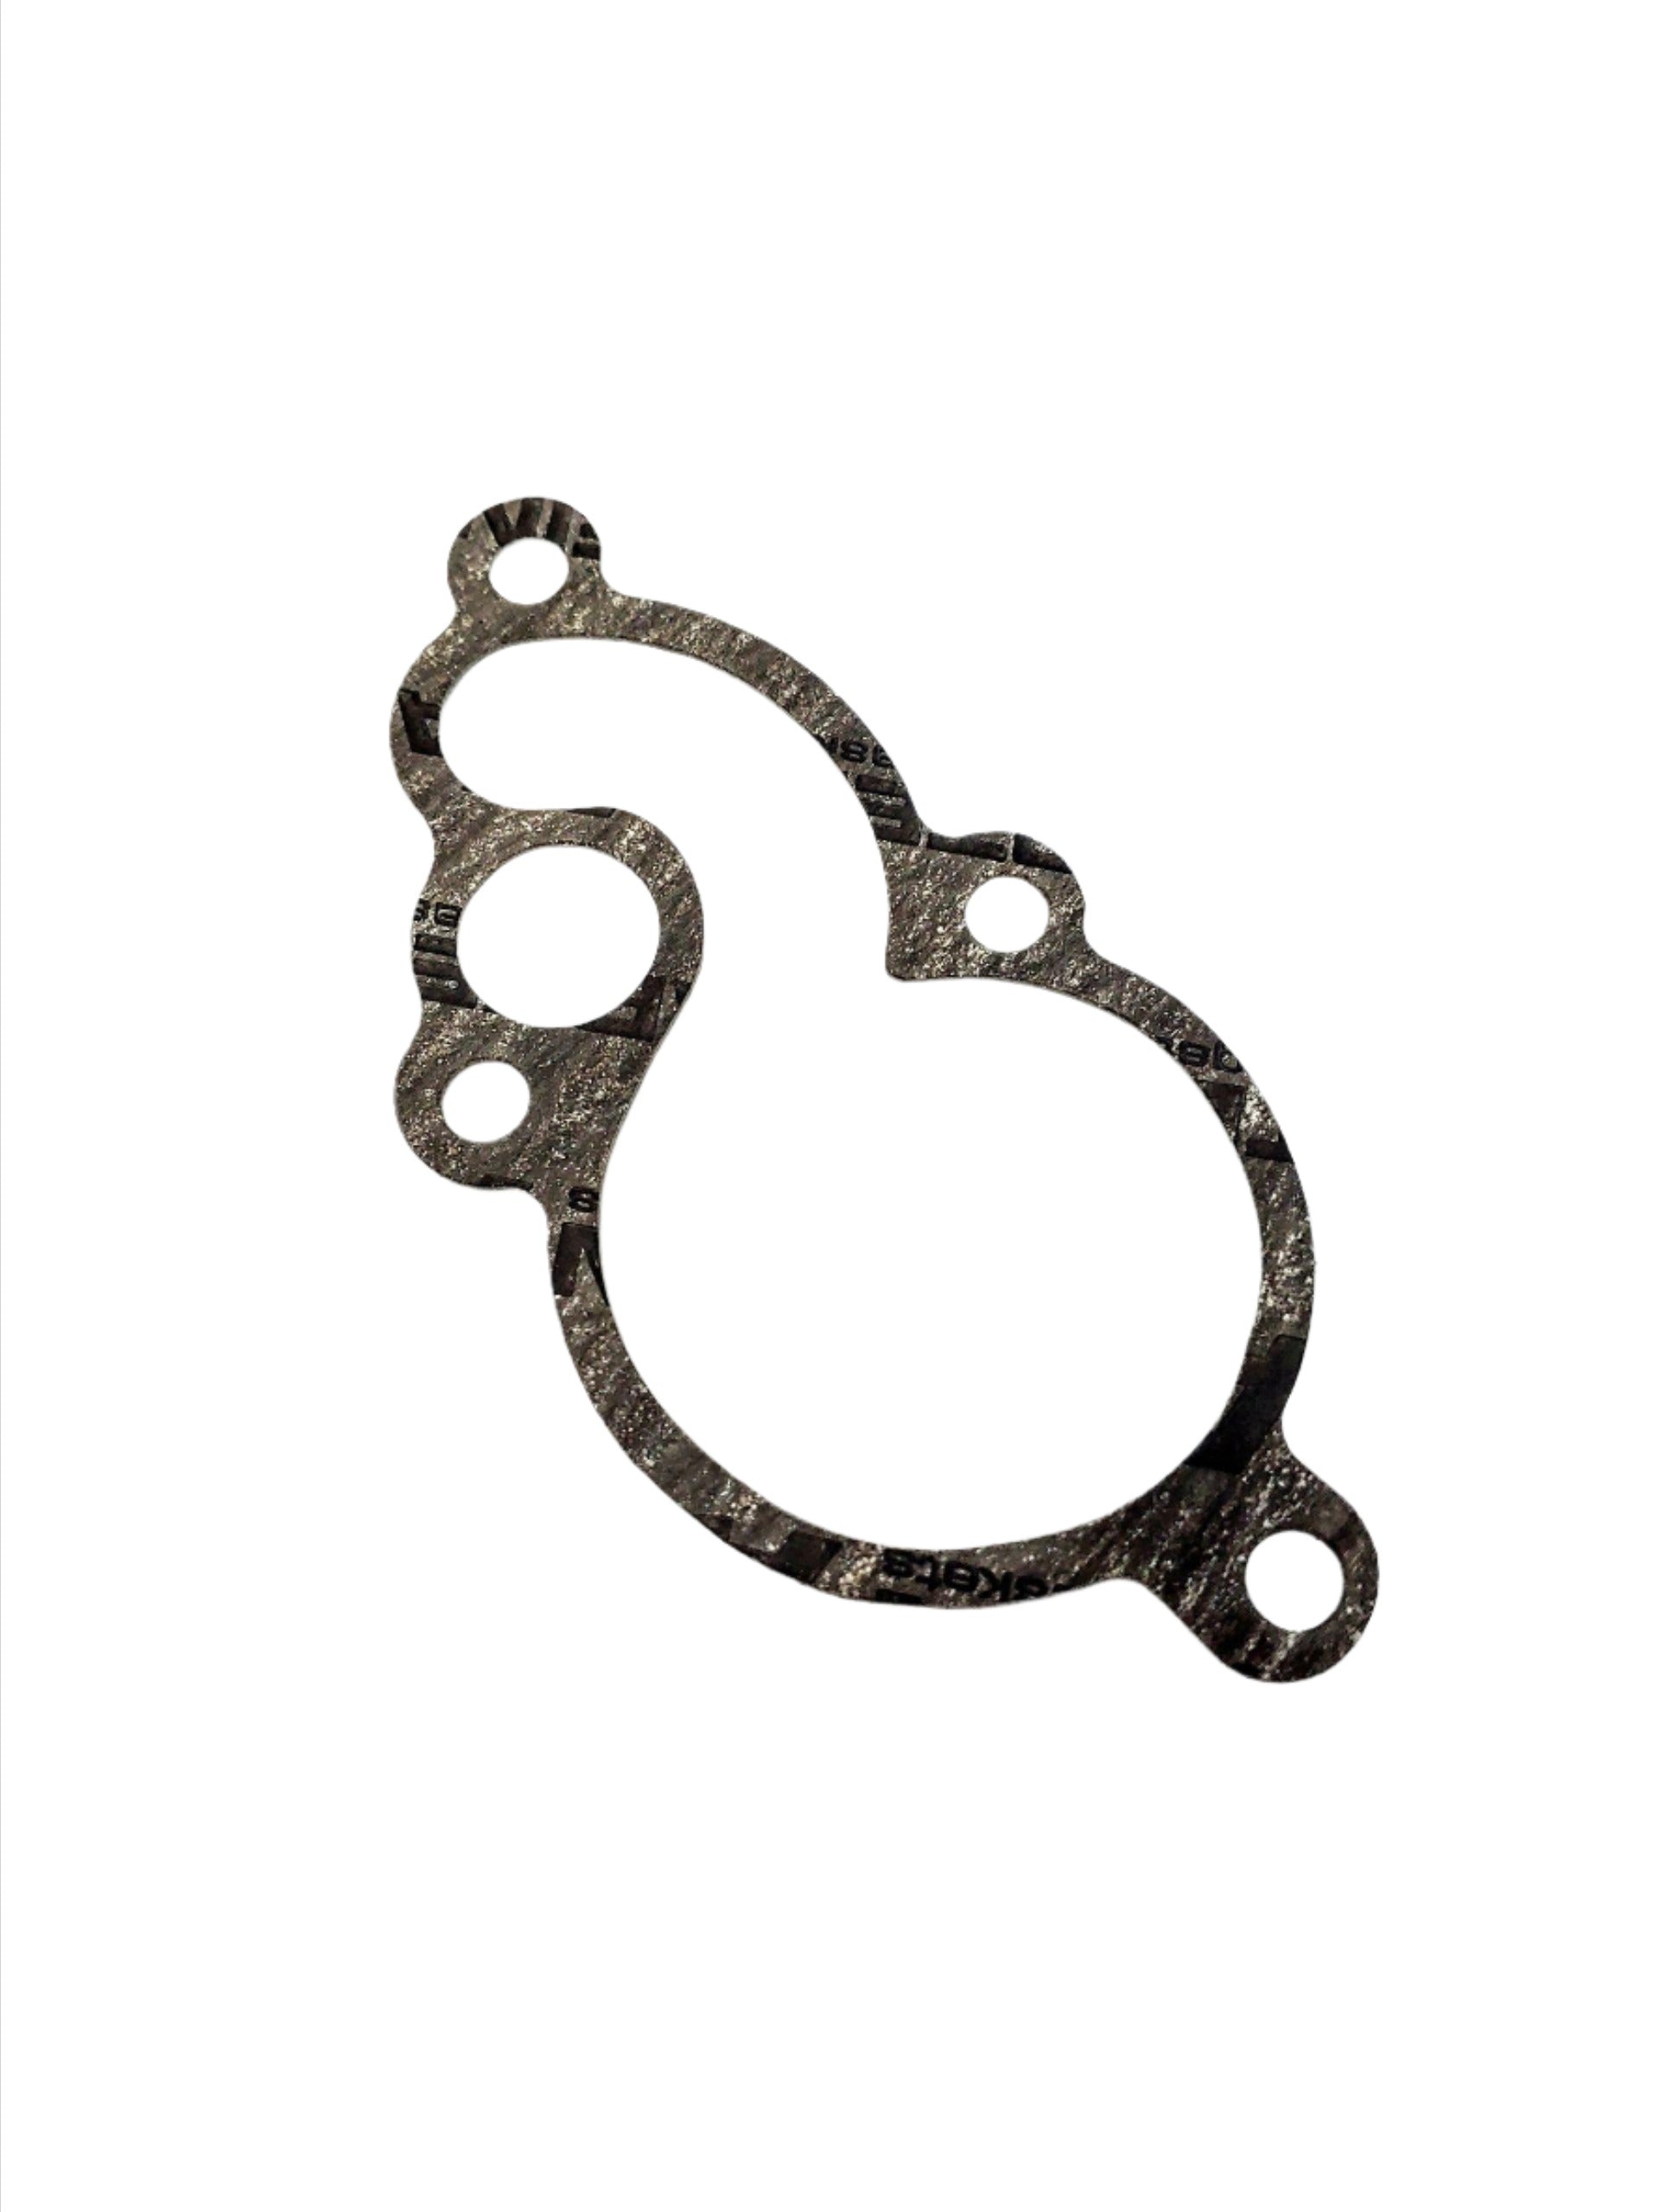 Clutch Cover Gasket - 0/000.490.9108